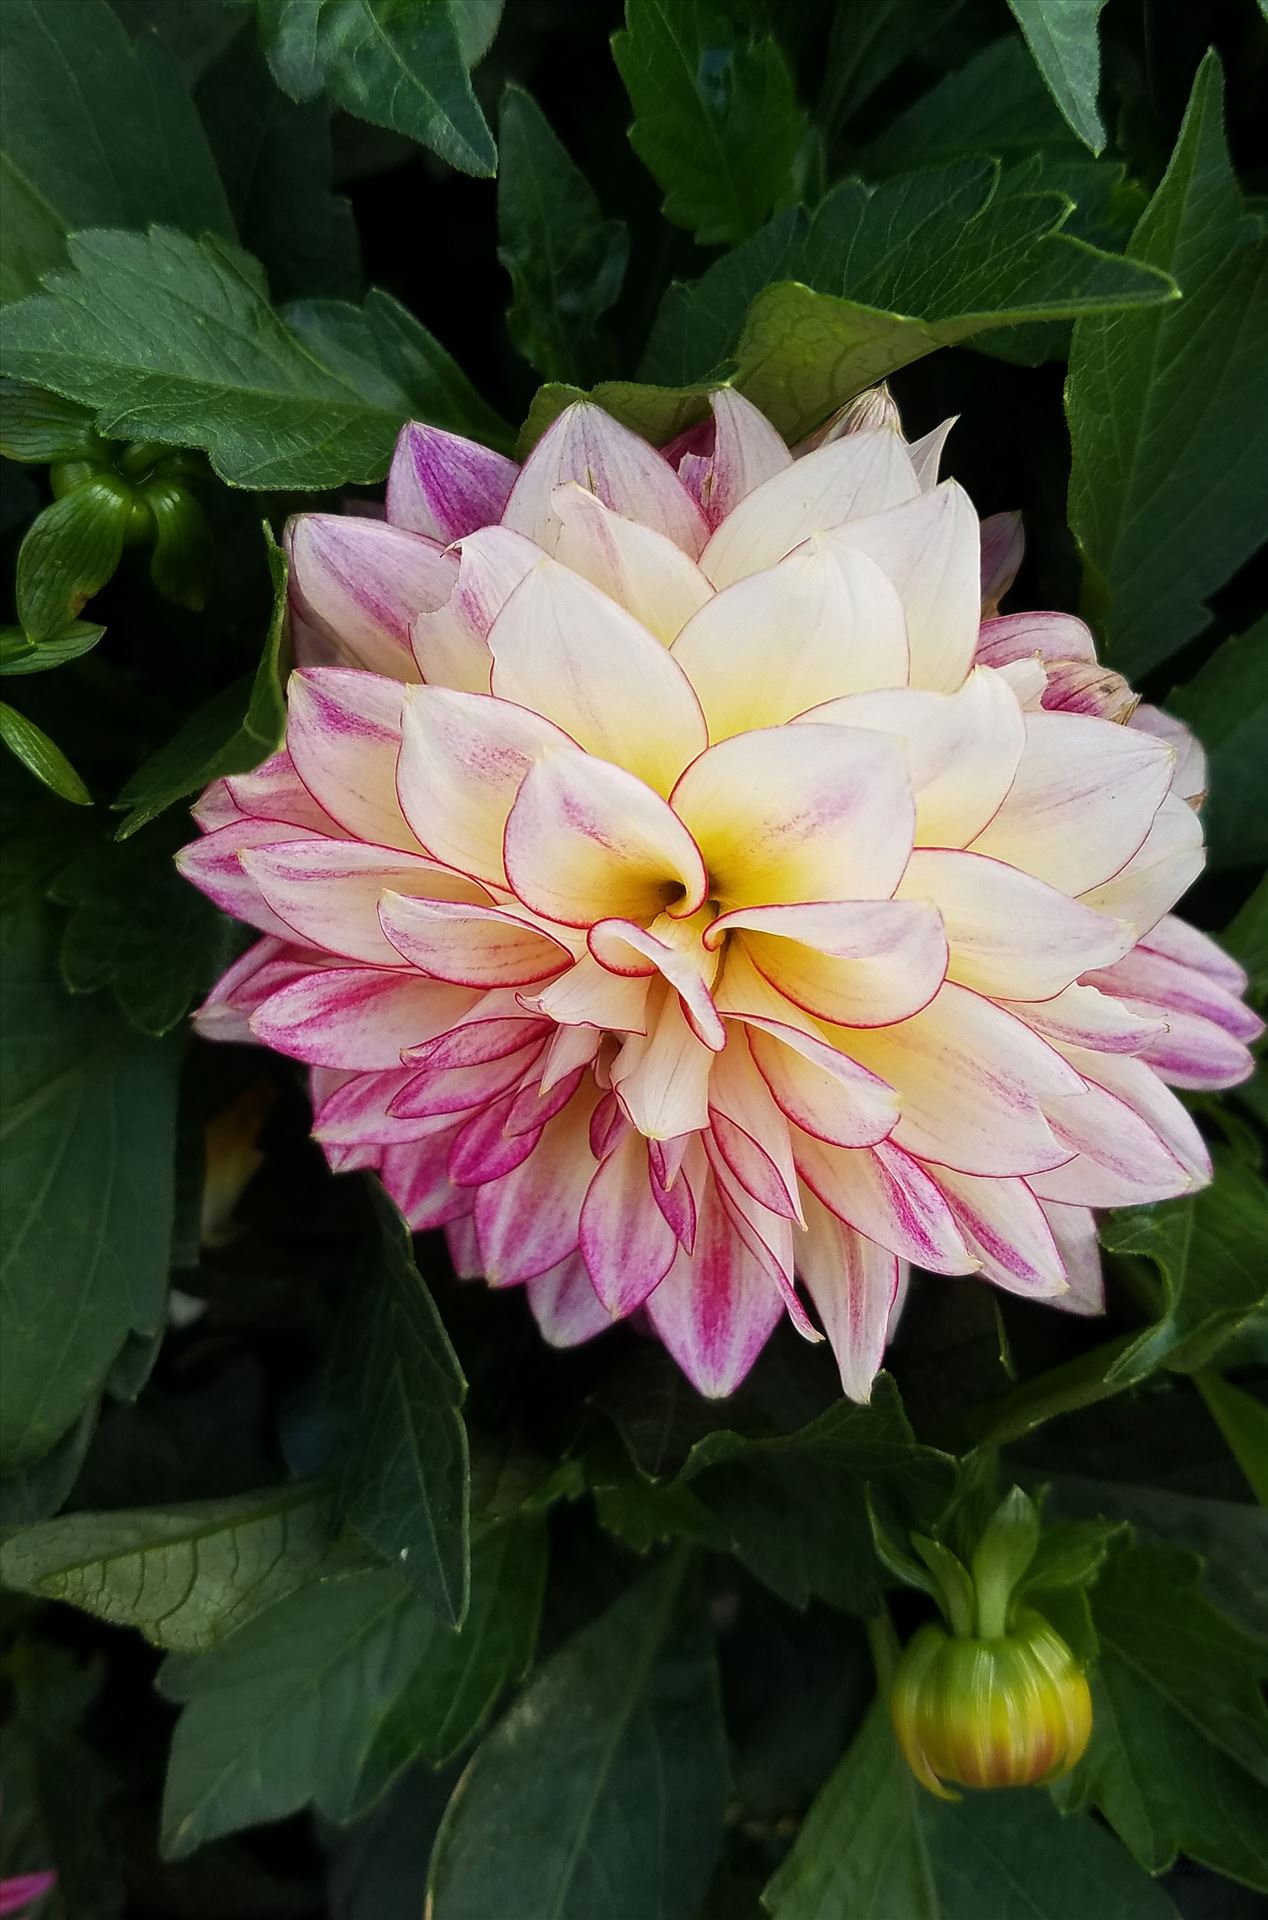 00-pink-dahlia-20170916_153120_A.jpg  by CLStauber Photography